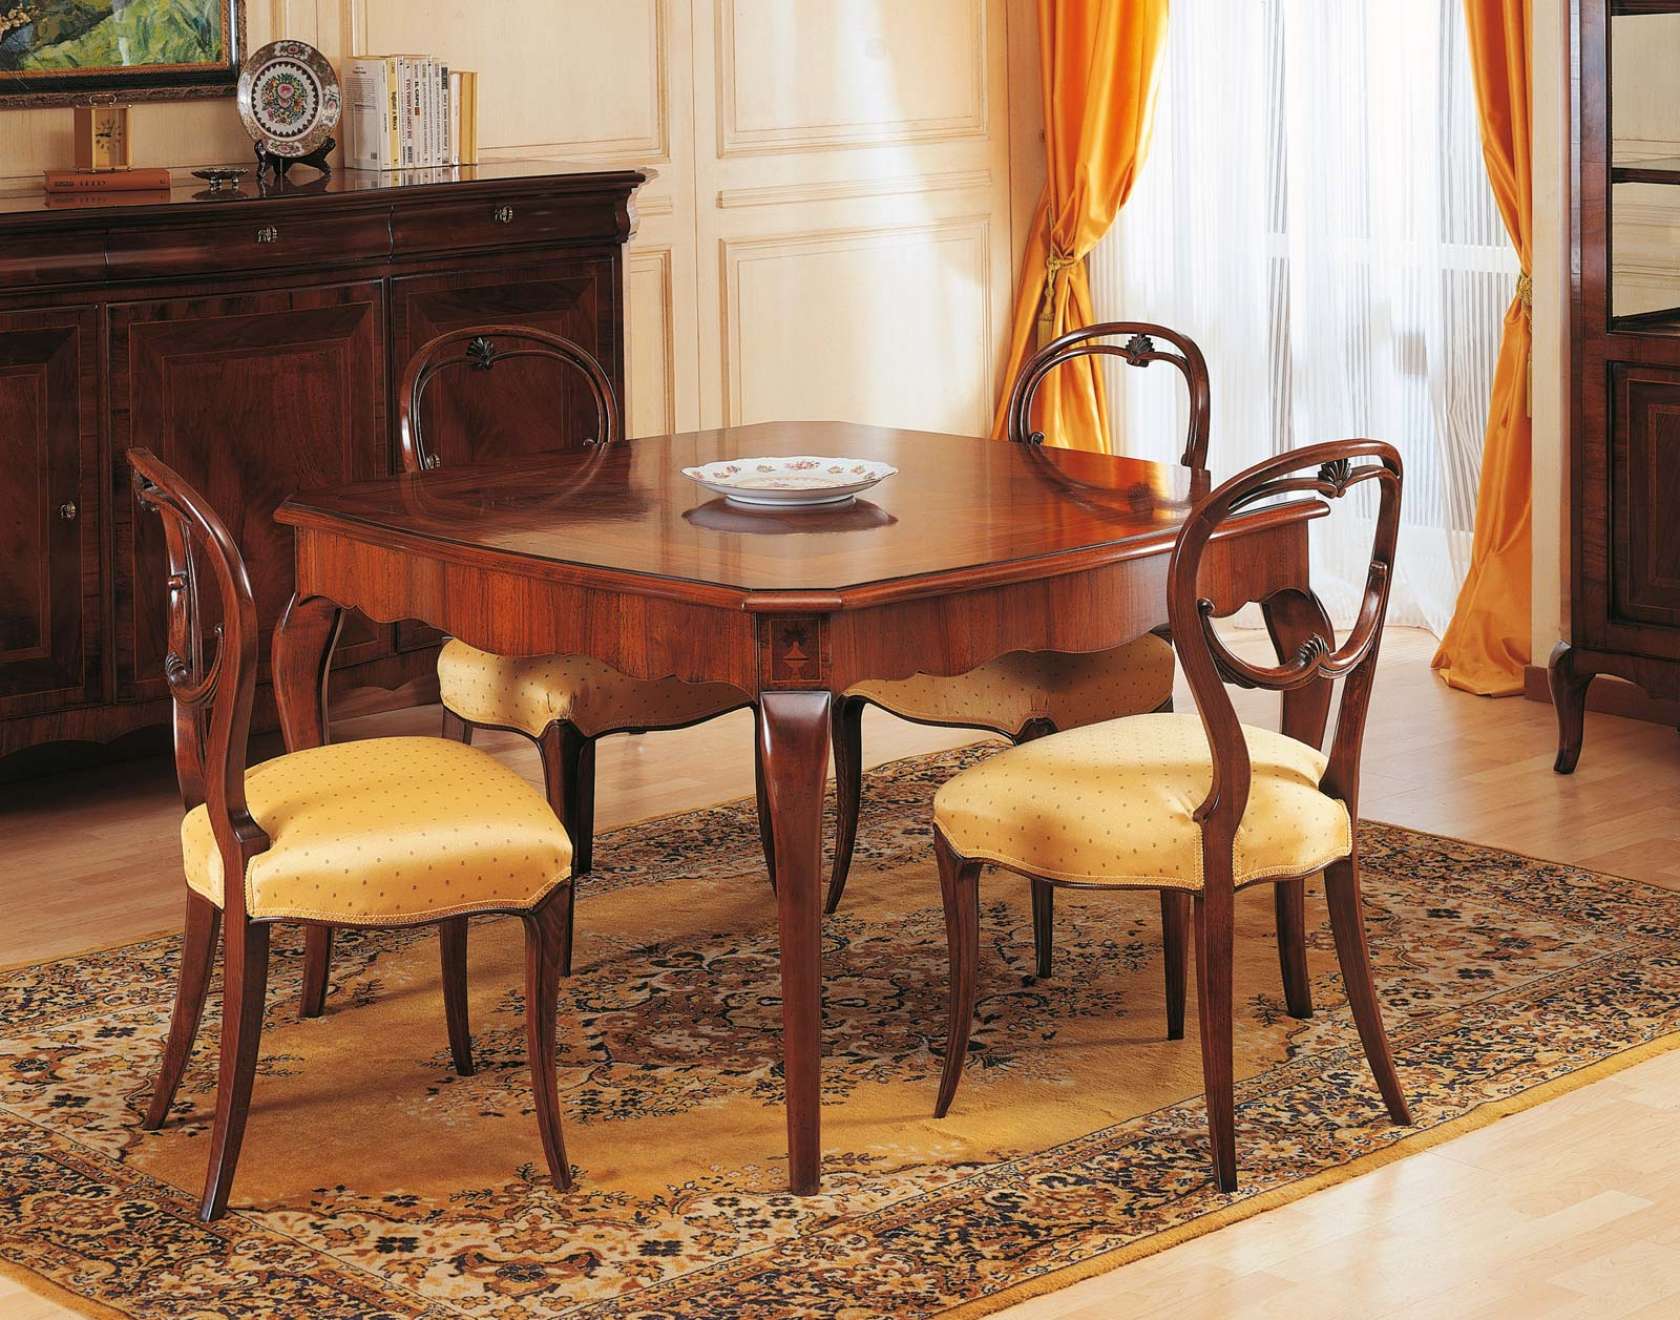 Wooden Furniture Online Purchasing Tips